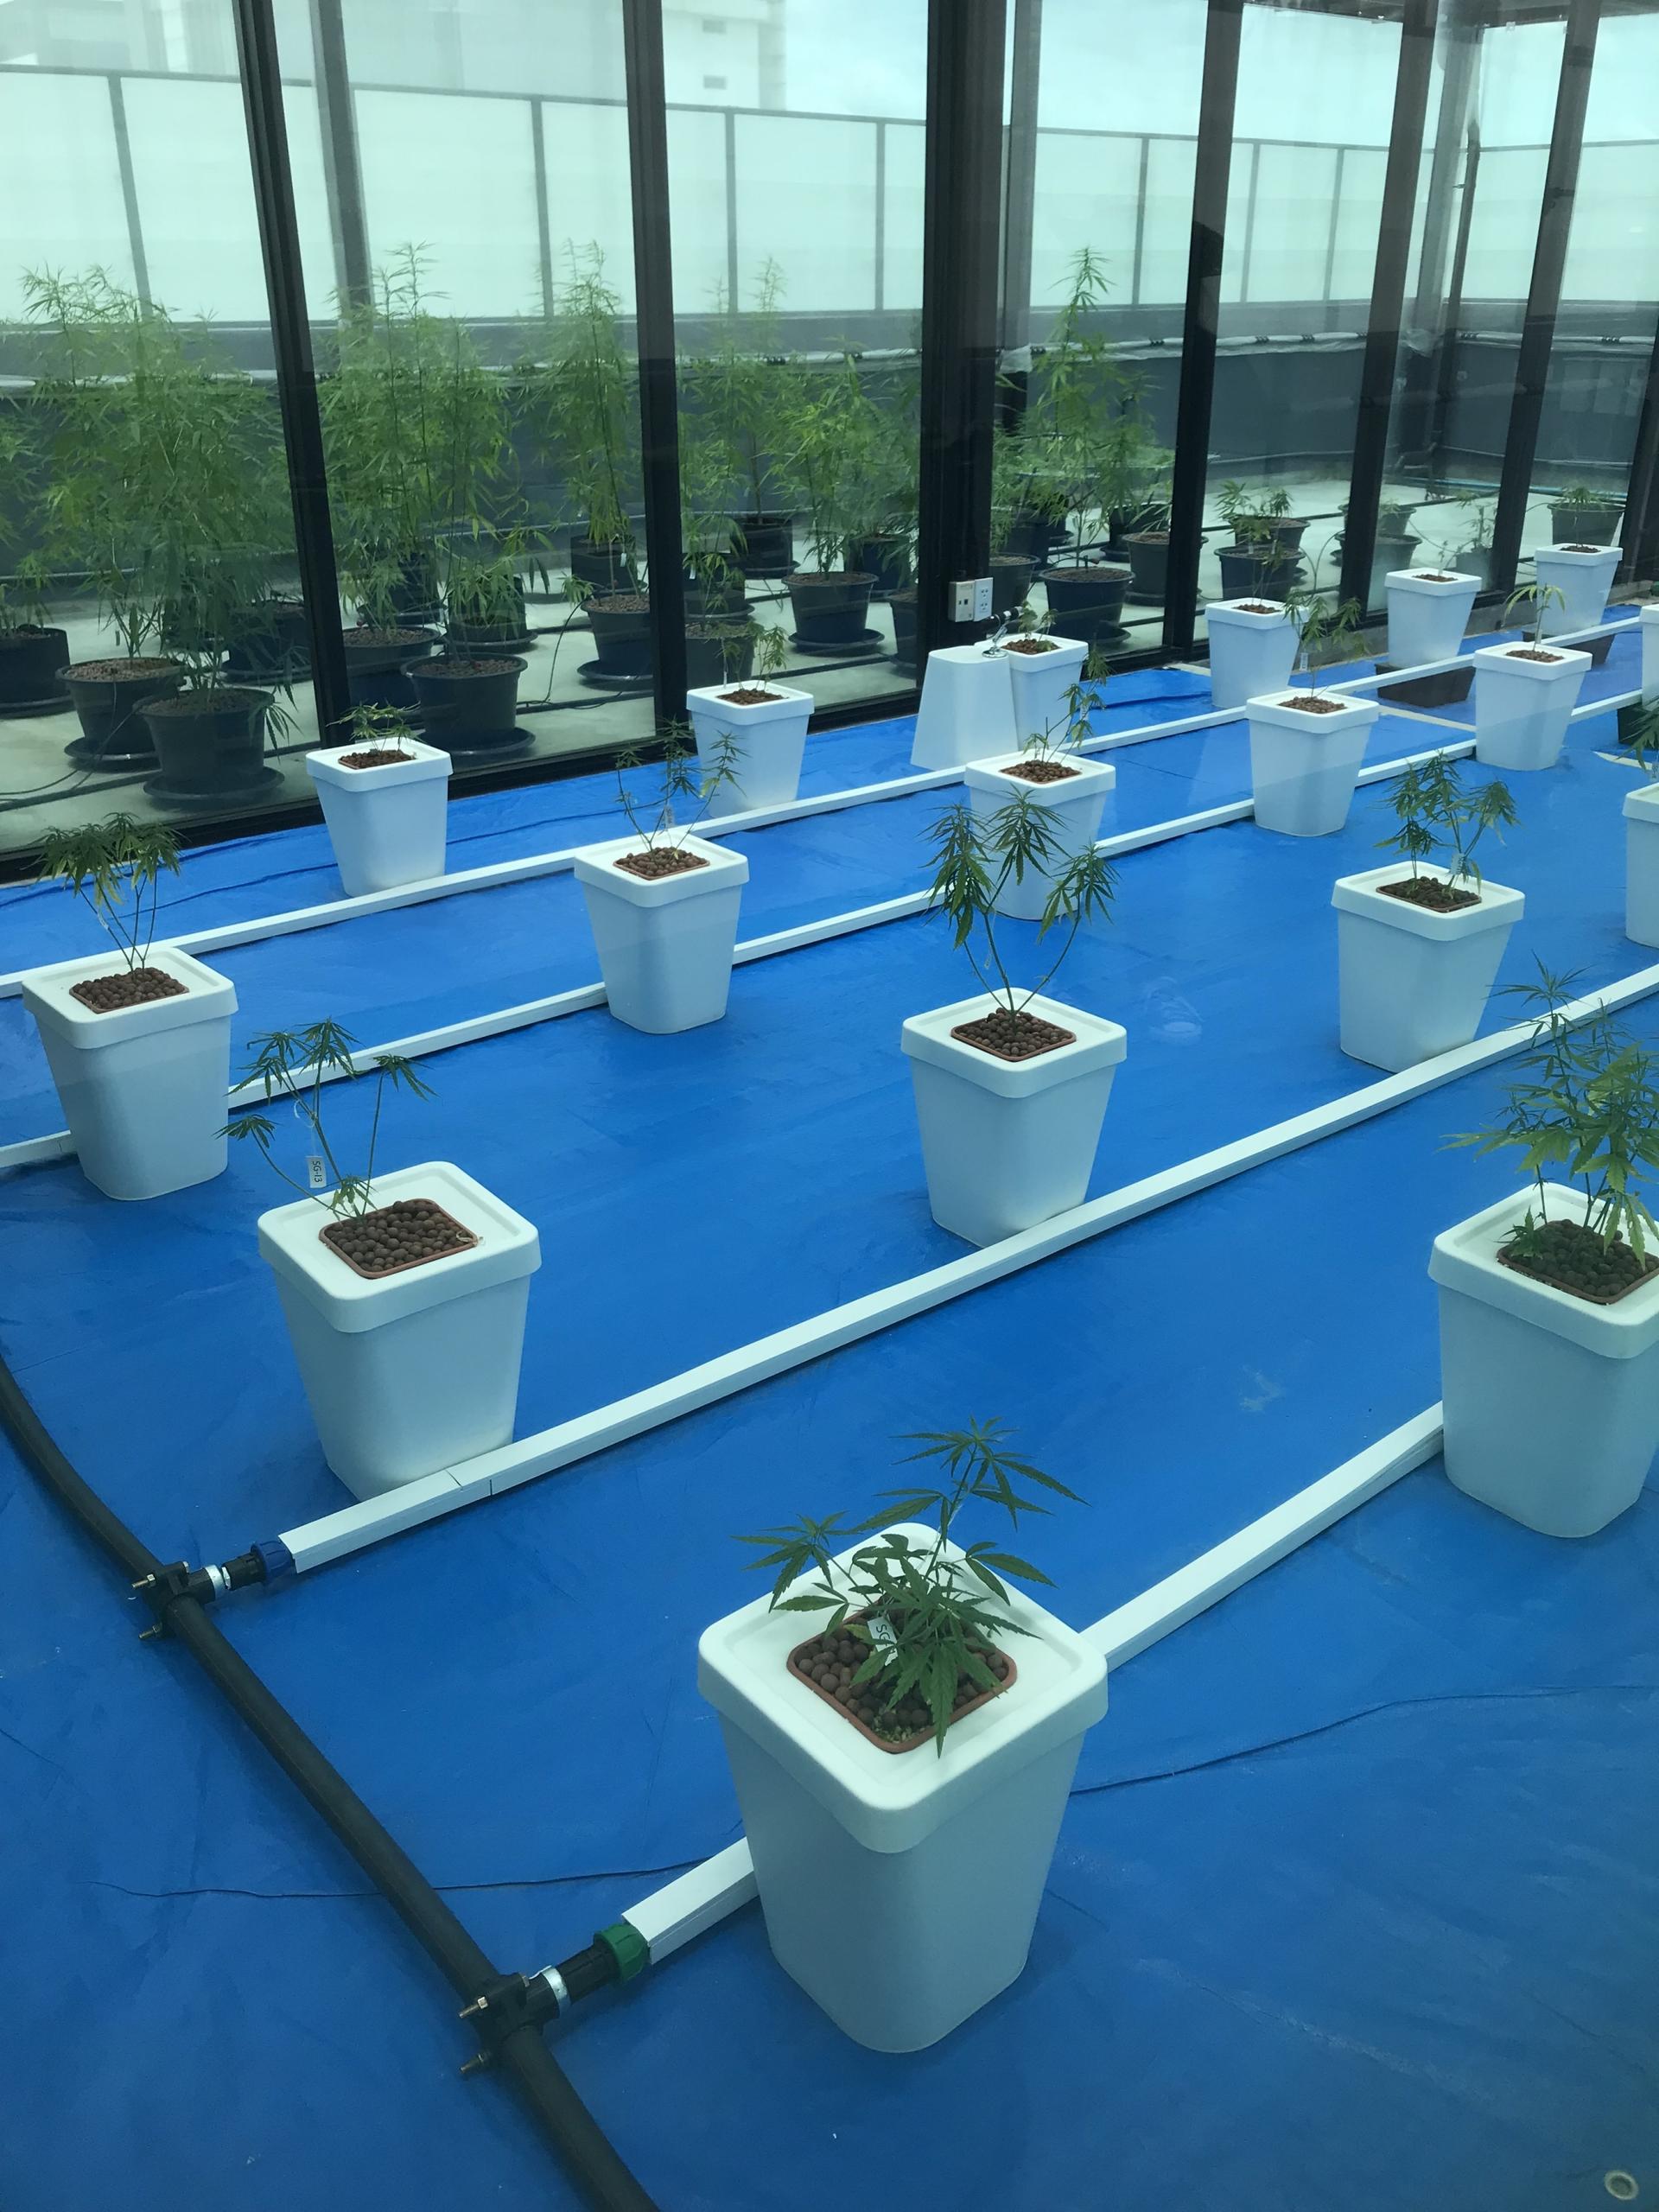 The first crop of legal cannabis plants grown by Thai professors at Rangsit University in a legal lab north of Bangkok.